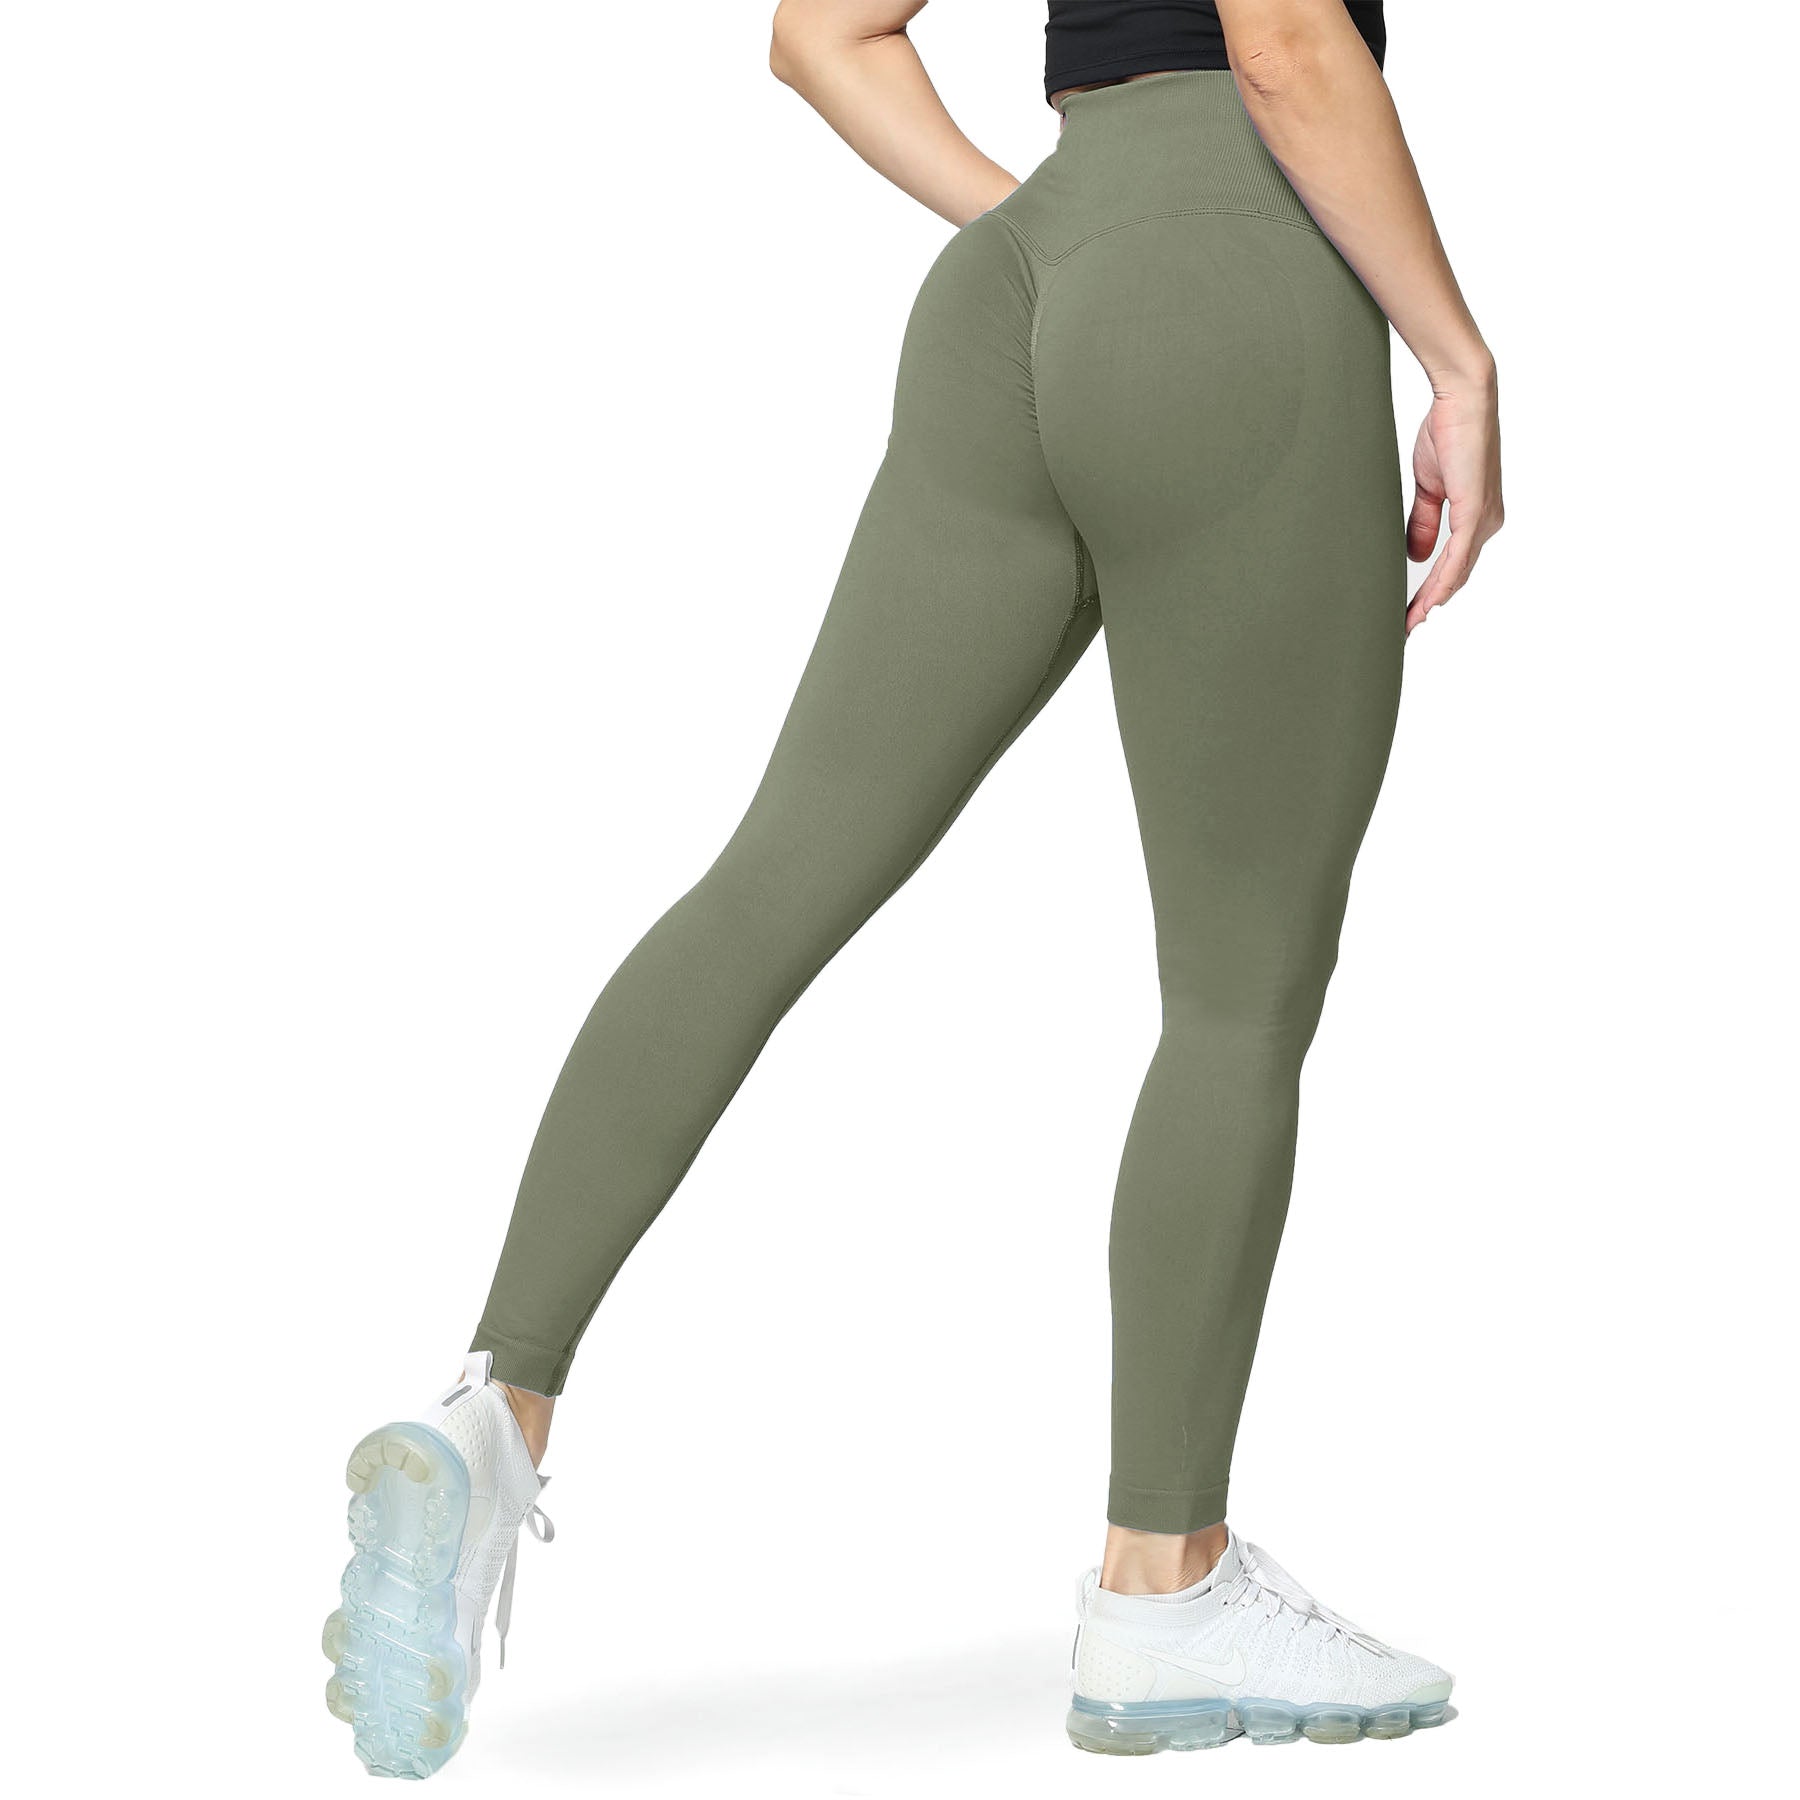 Aoxjox Workout Leggings for Women Tummy Control Butt Lifting Revye